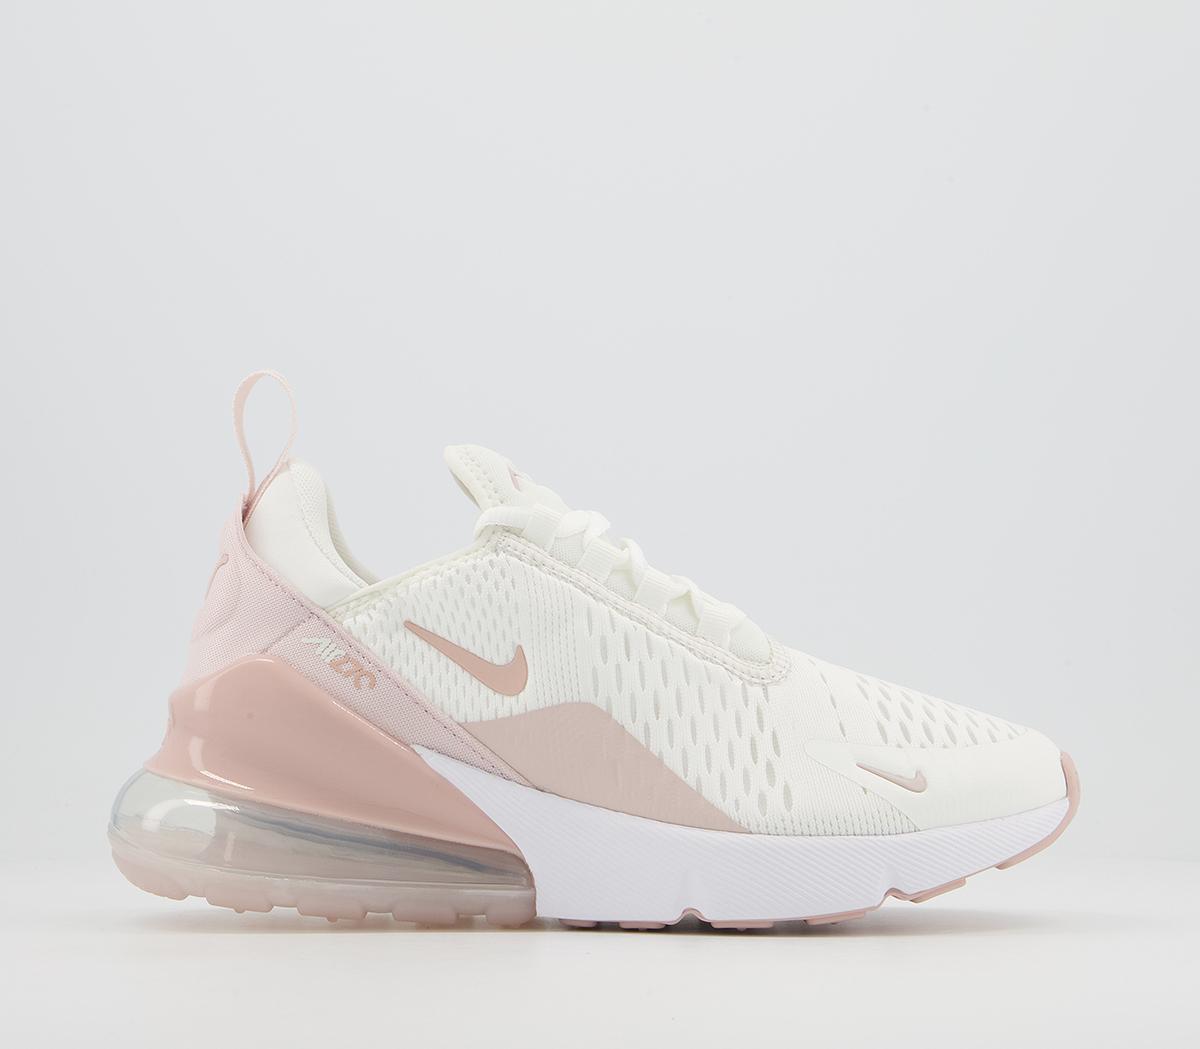 nike air max 270 women's white and pink